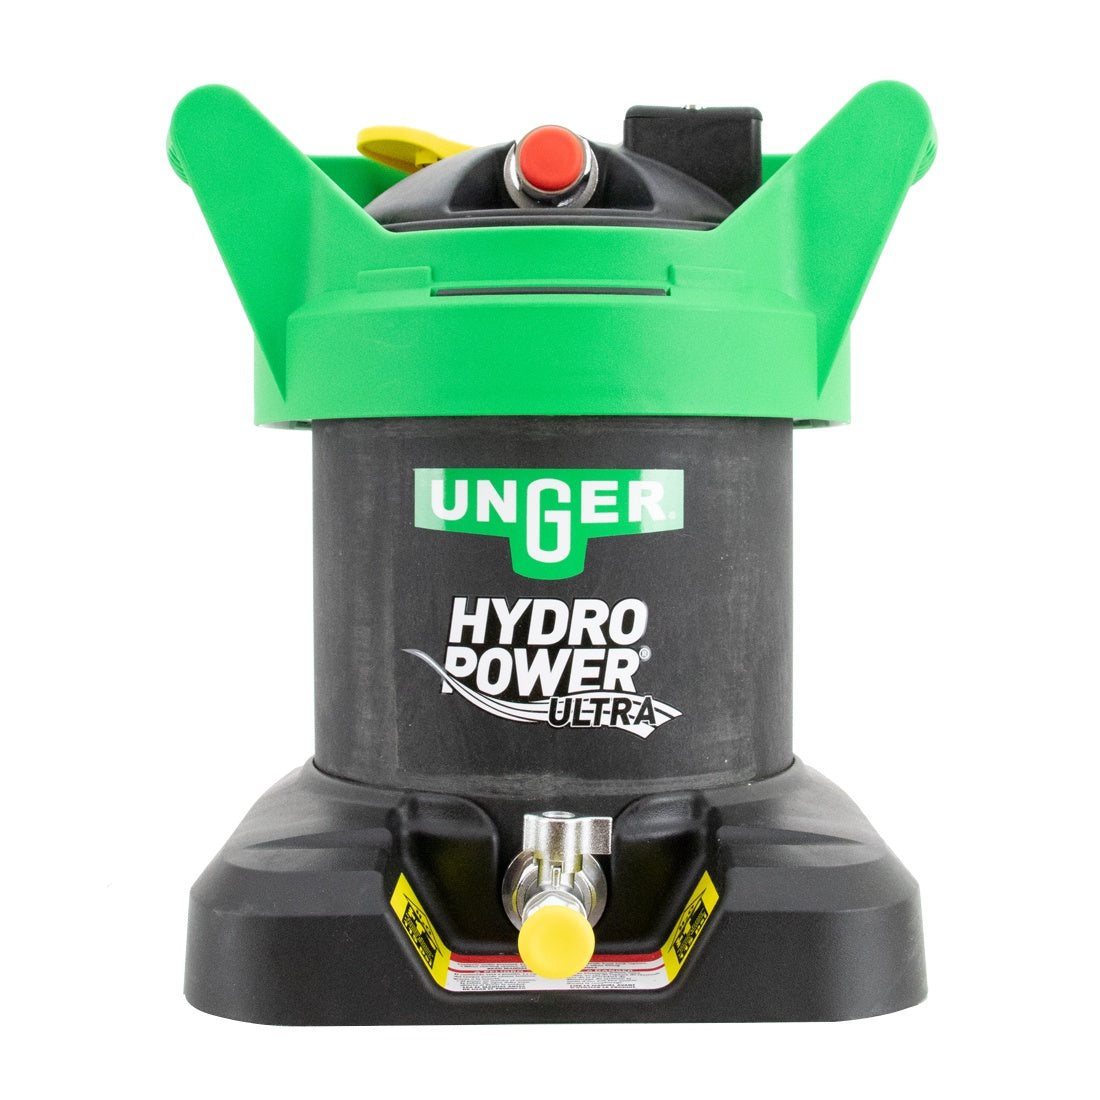 Unger HydroPower Ultra 1-Stage Front View